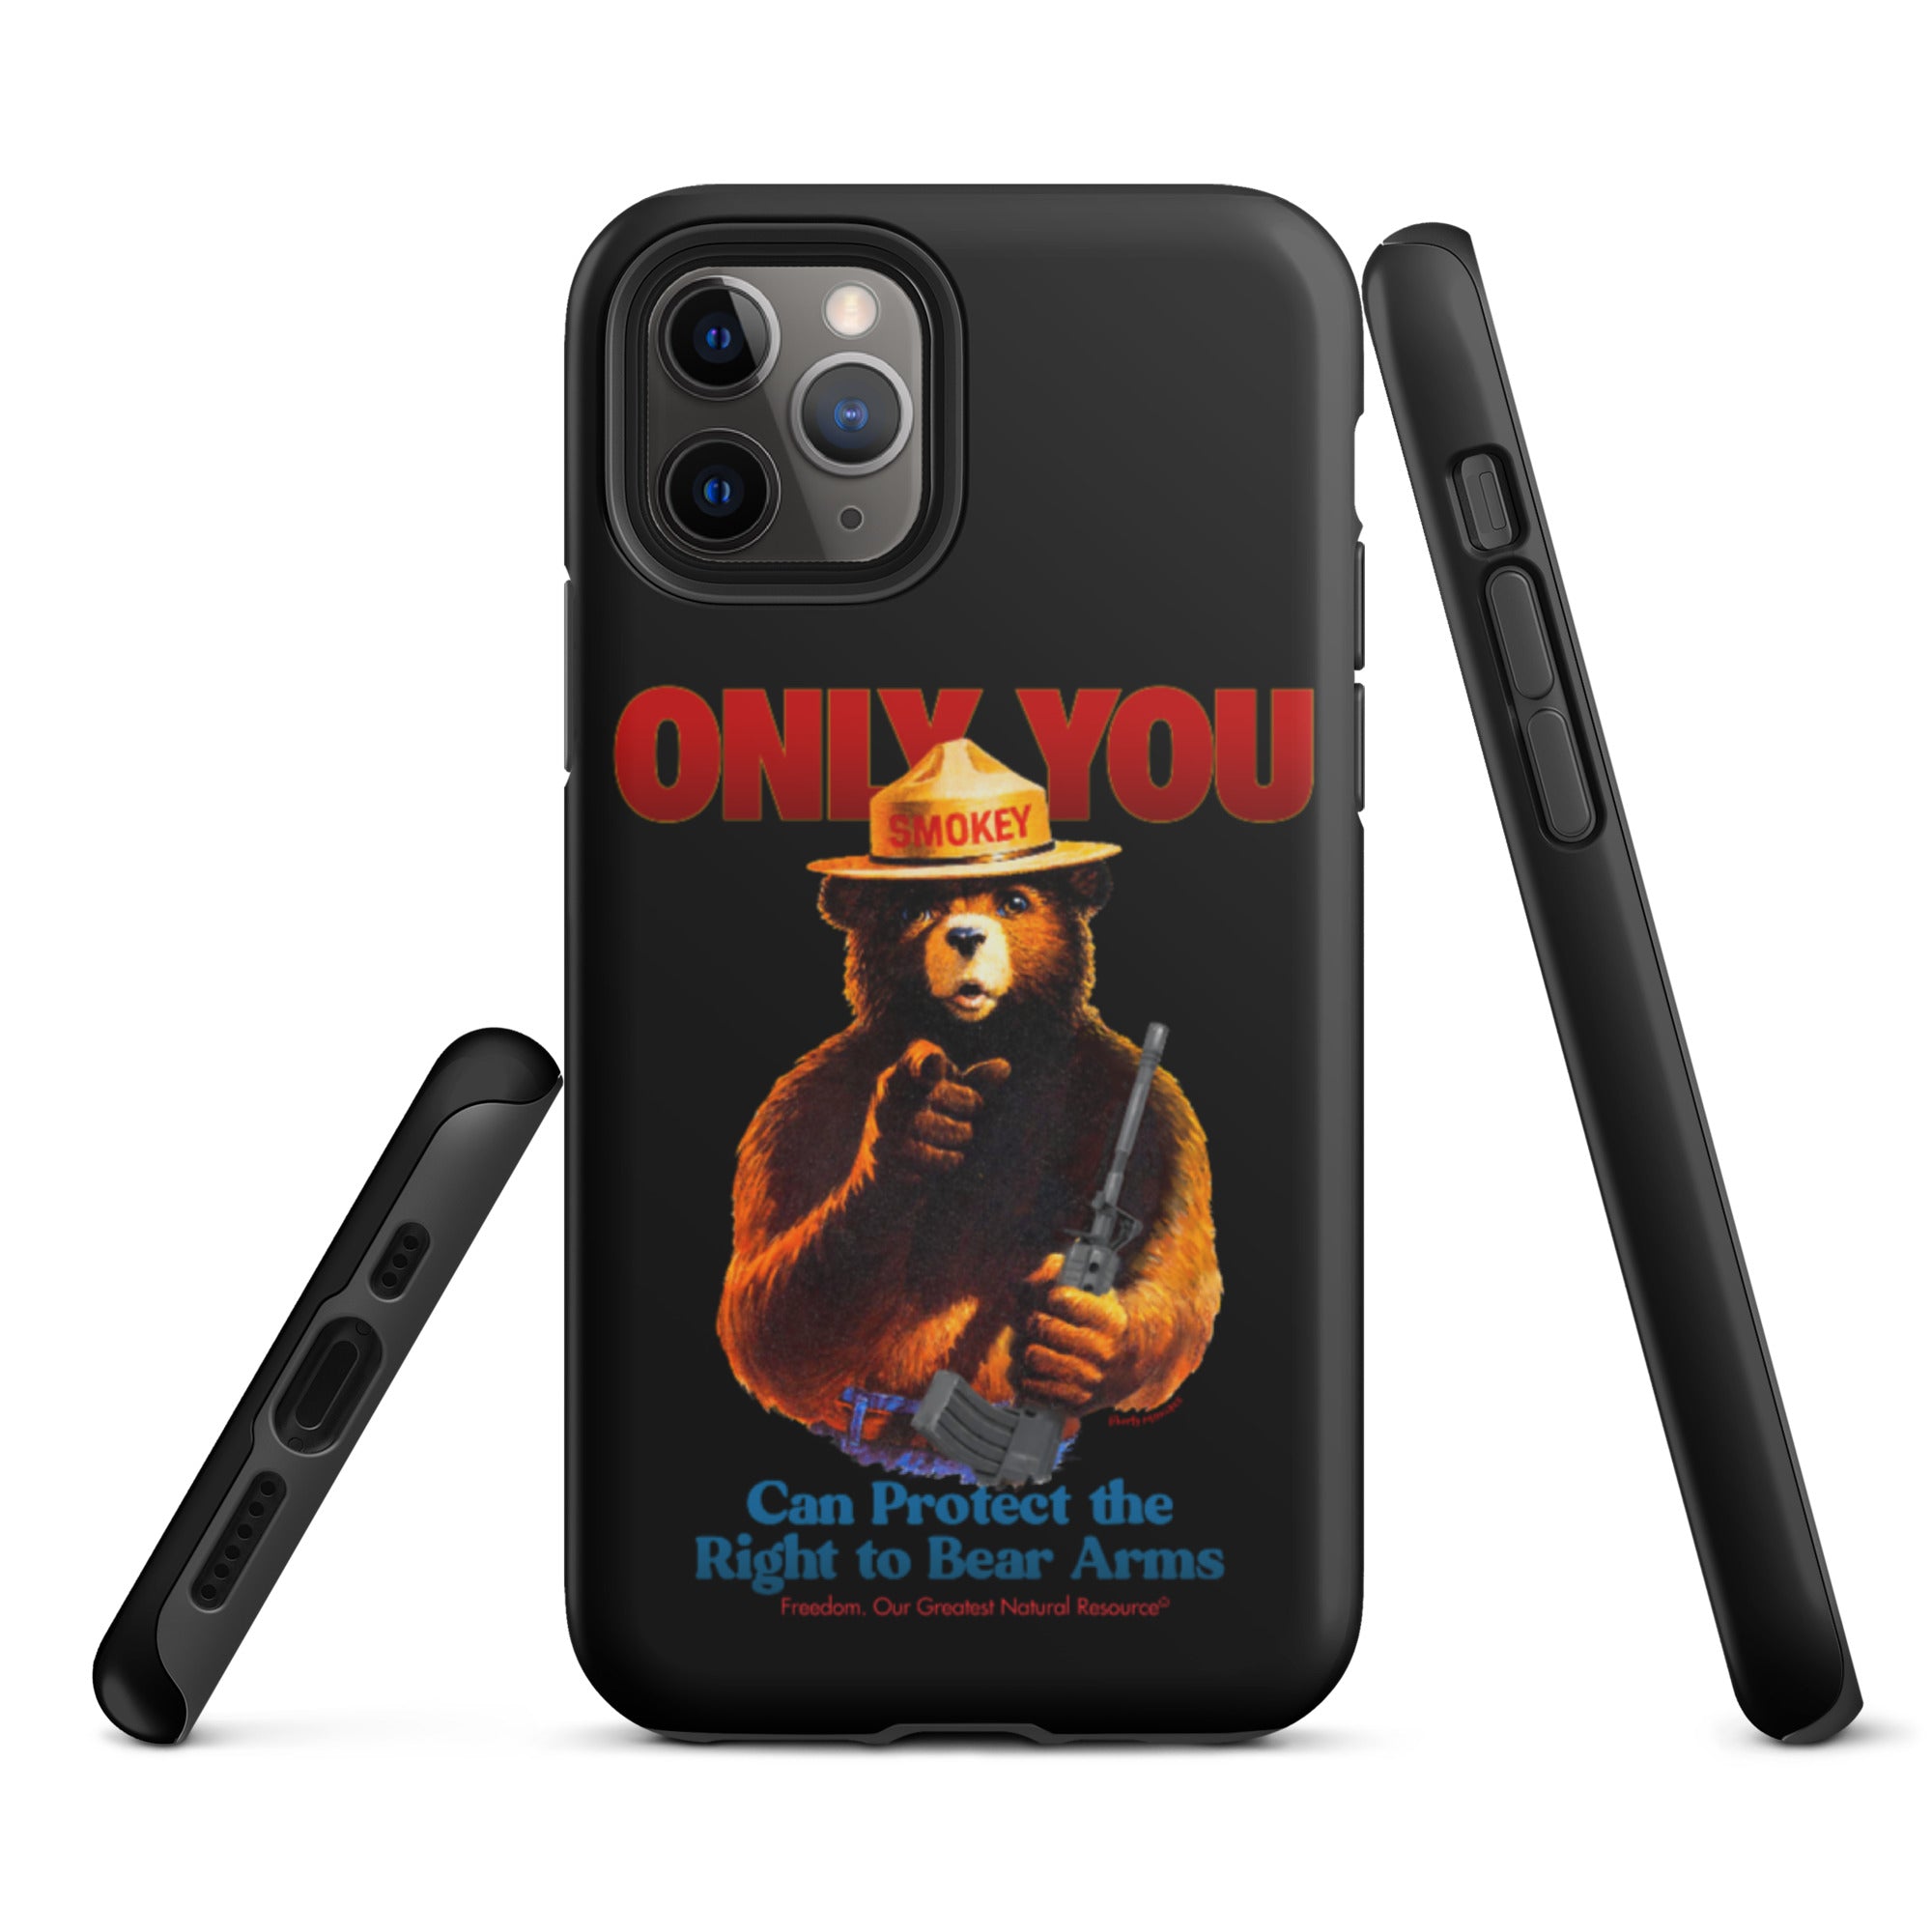 Only You Can Protect the Right to Bear Arms Tough iPhone case